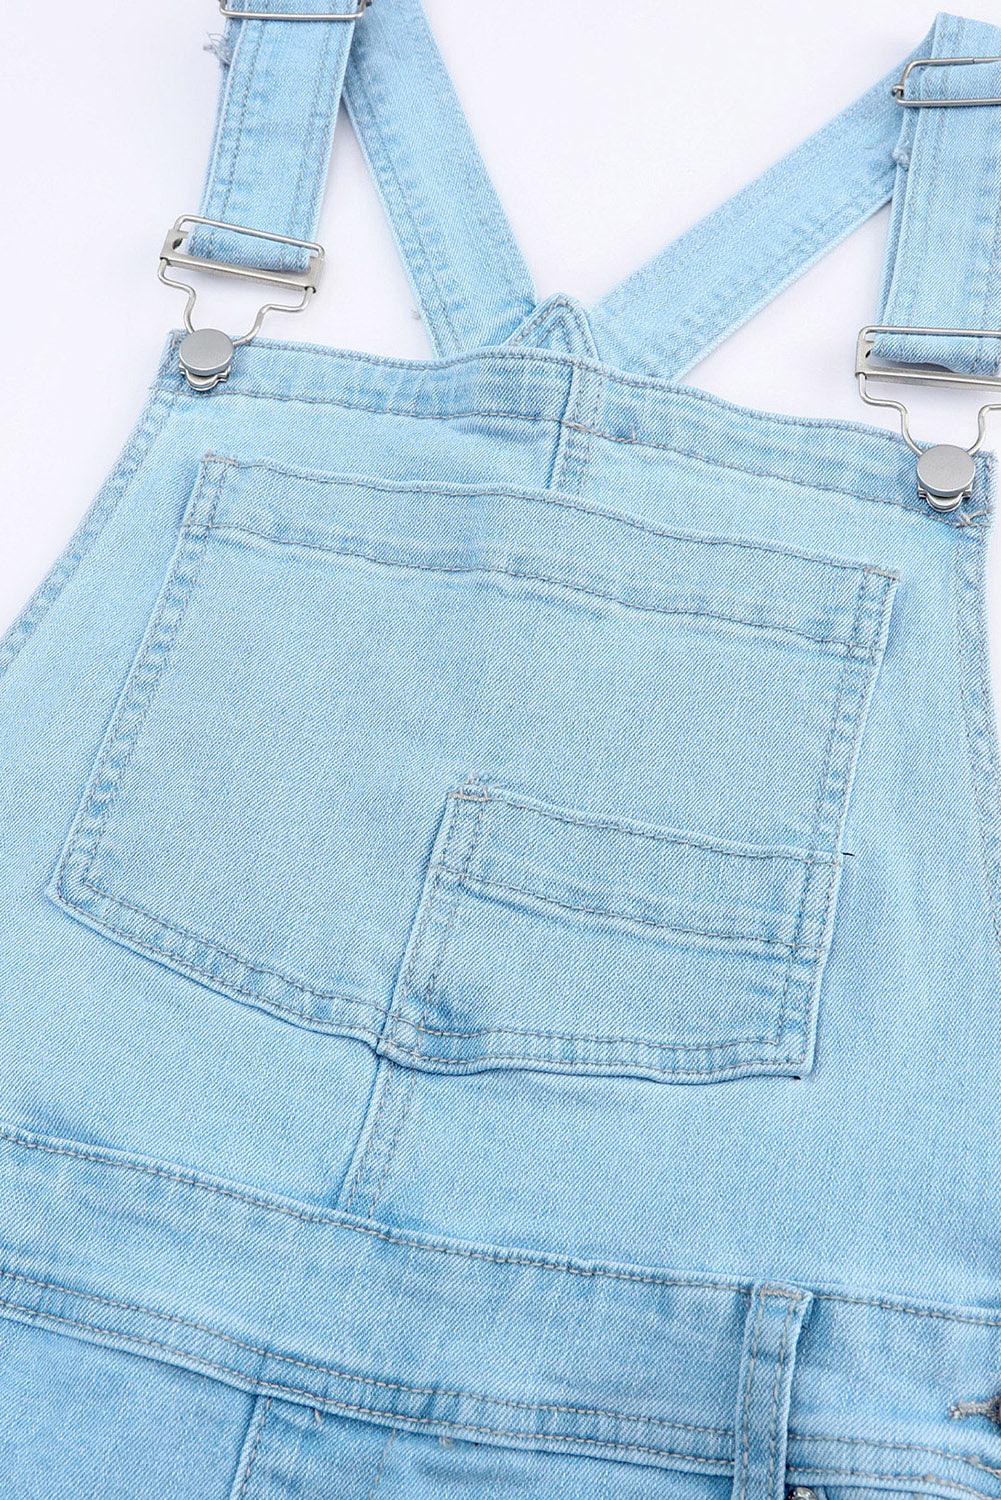 Distressed Denim Overalls with Pockets - Lucianne Boutique